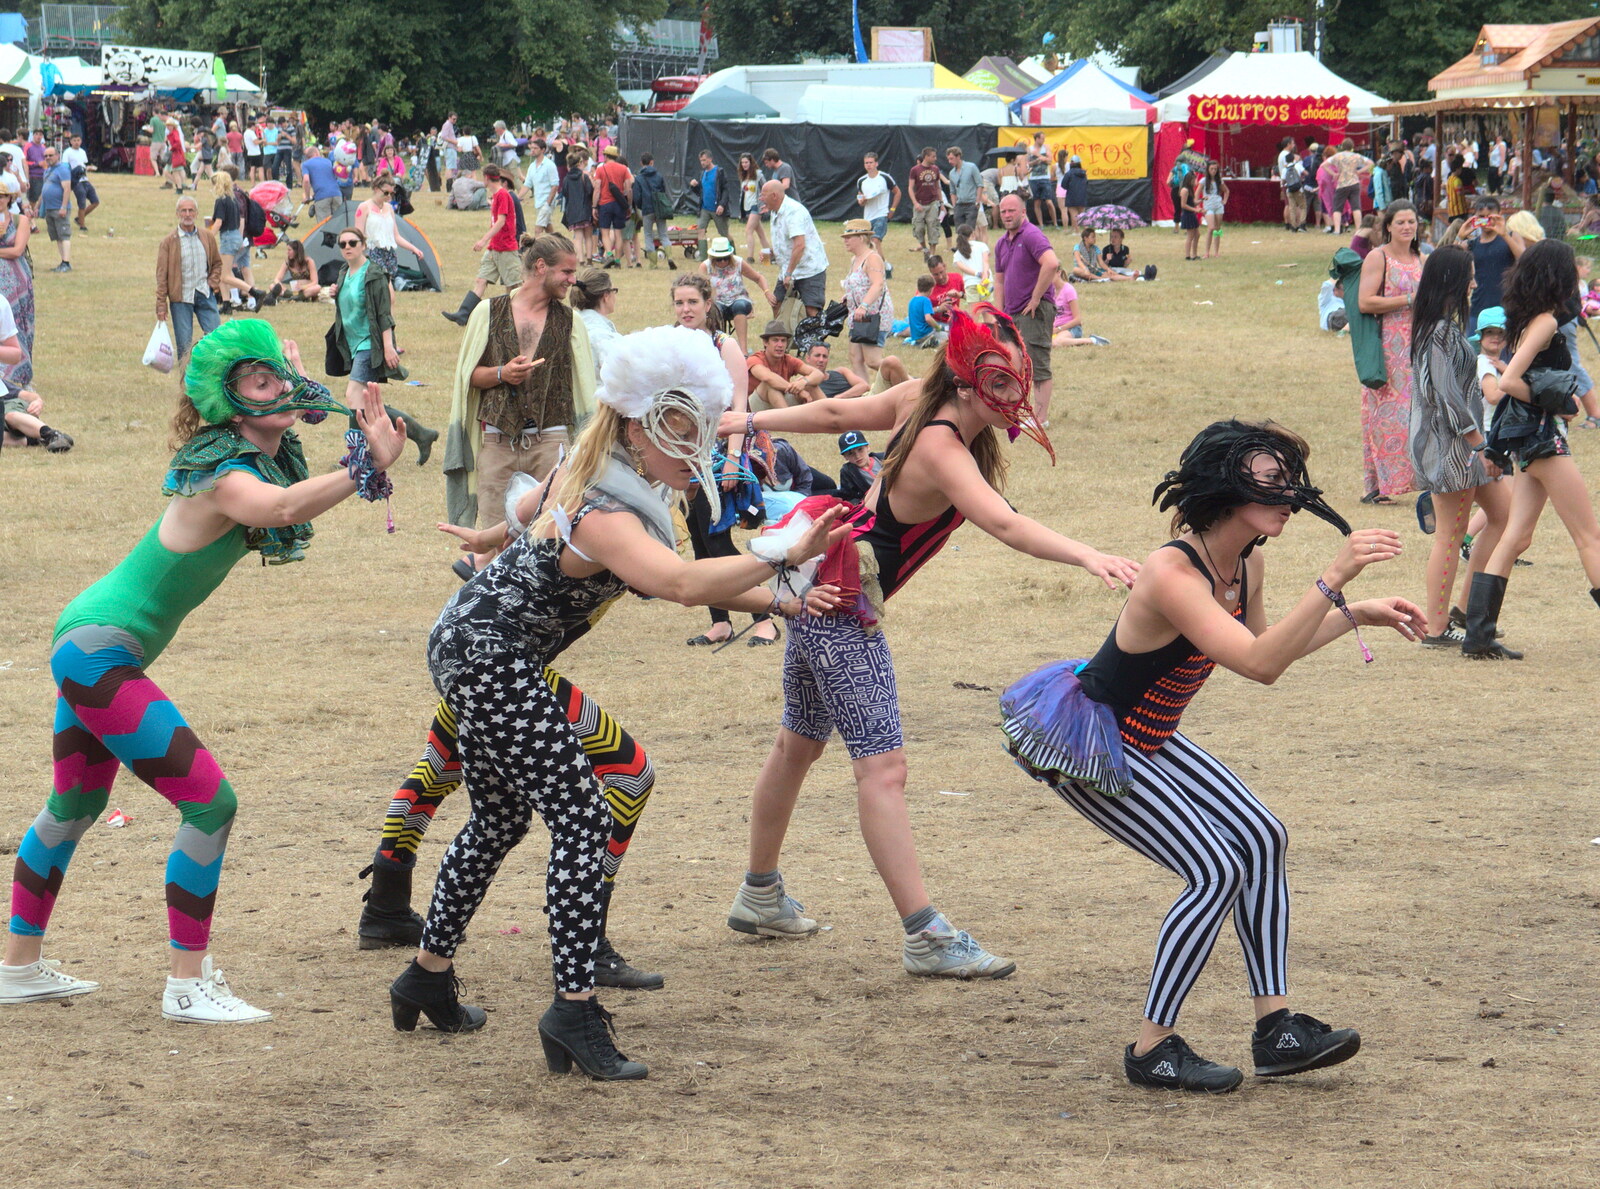 An escaped ballet troupe do some dancing from Latitude Festival, Henham Park, Southwold, Suffolk - 17th July 2014